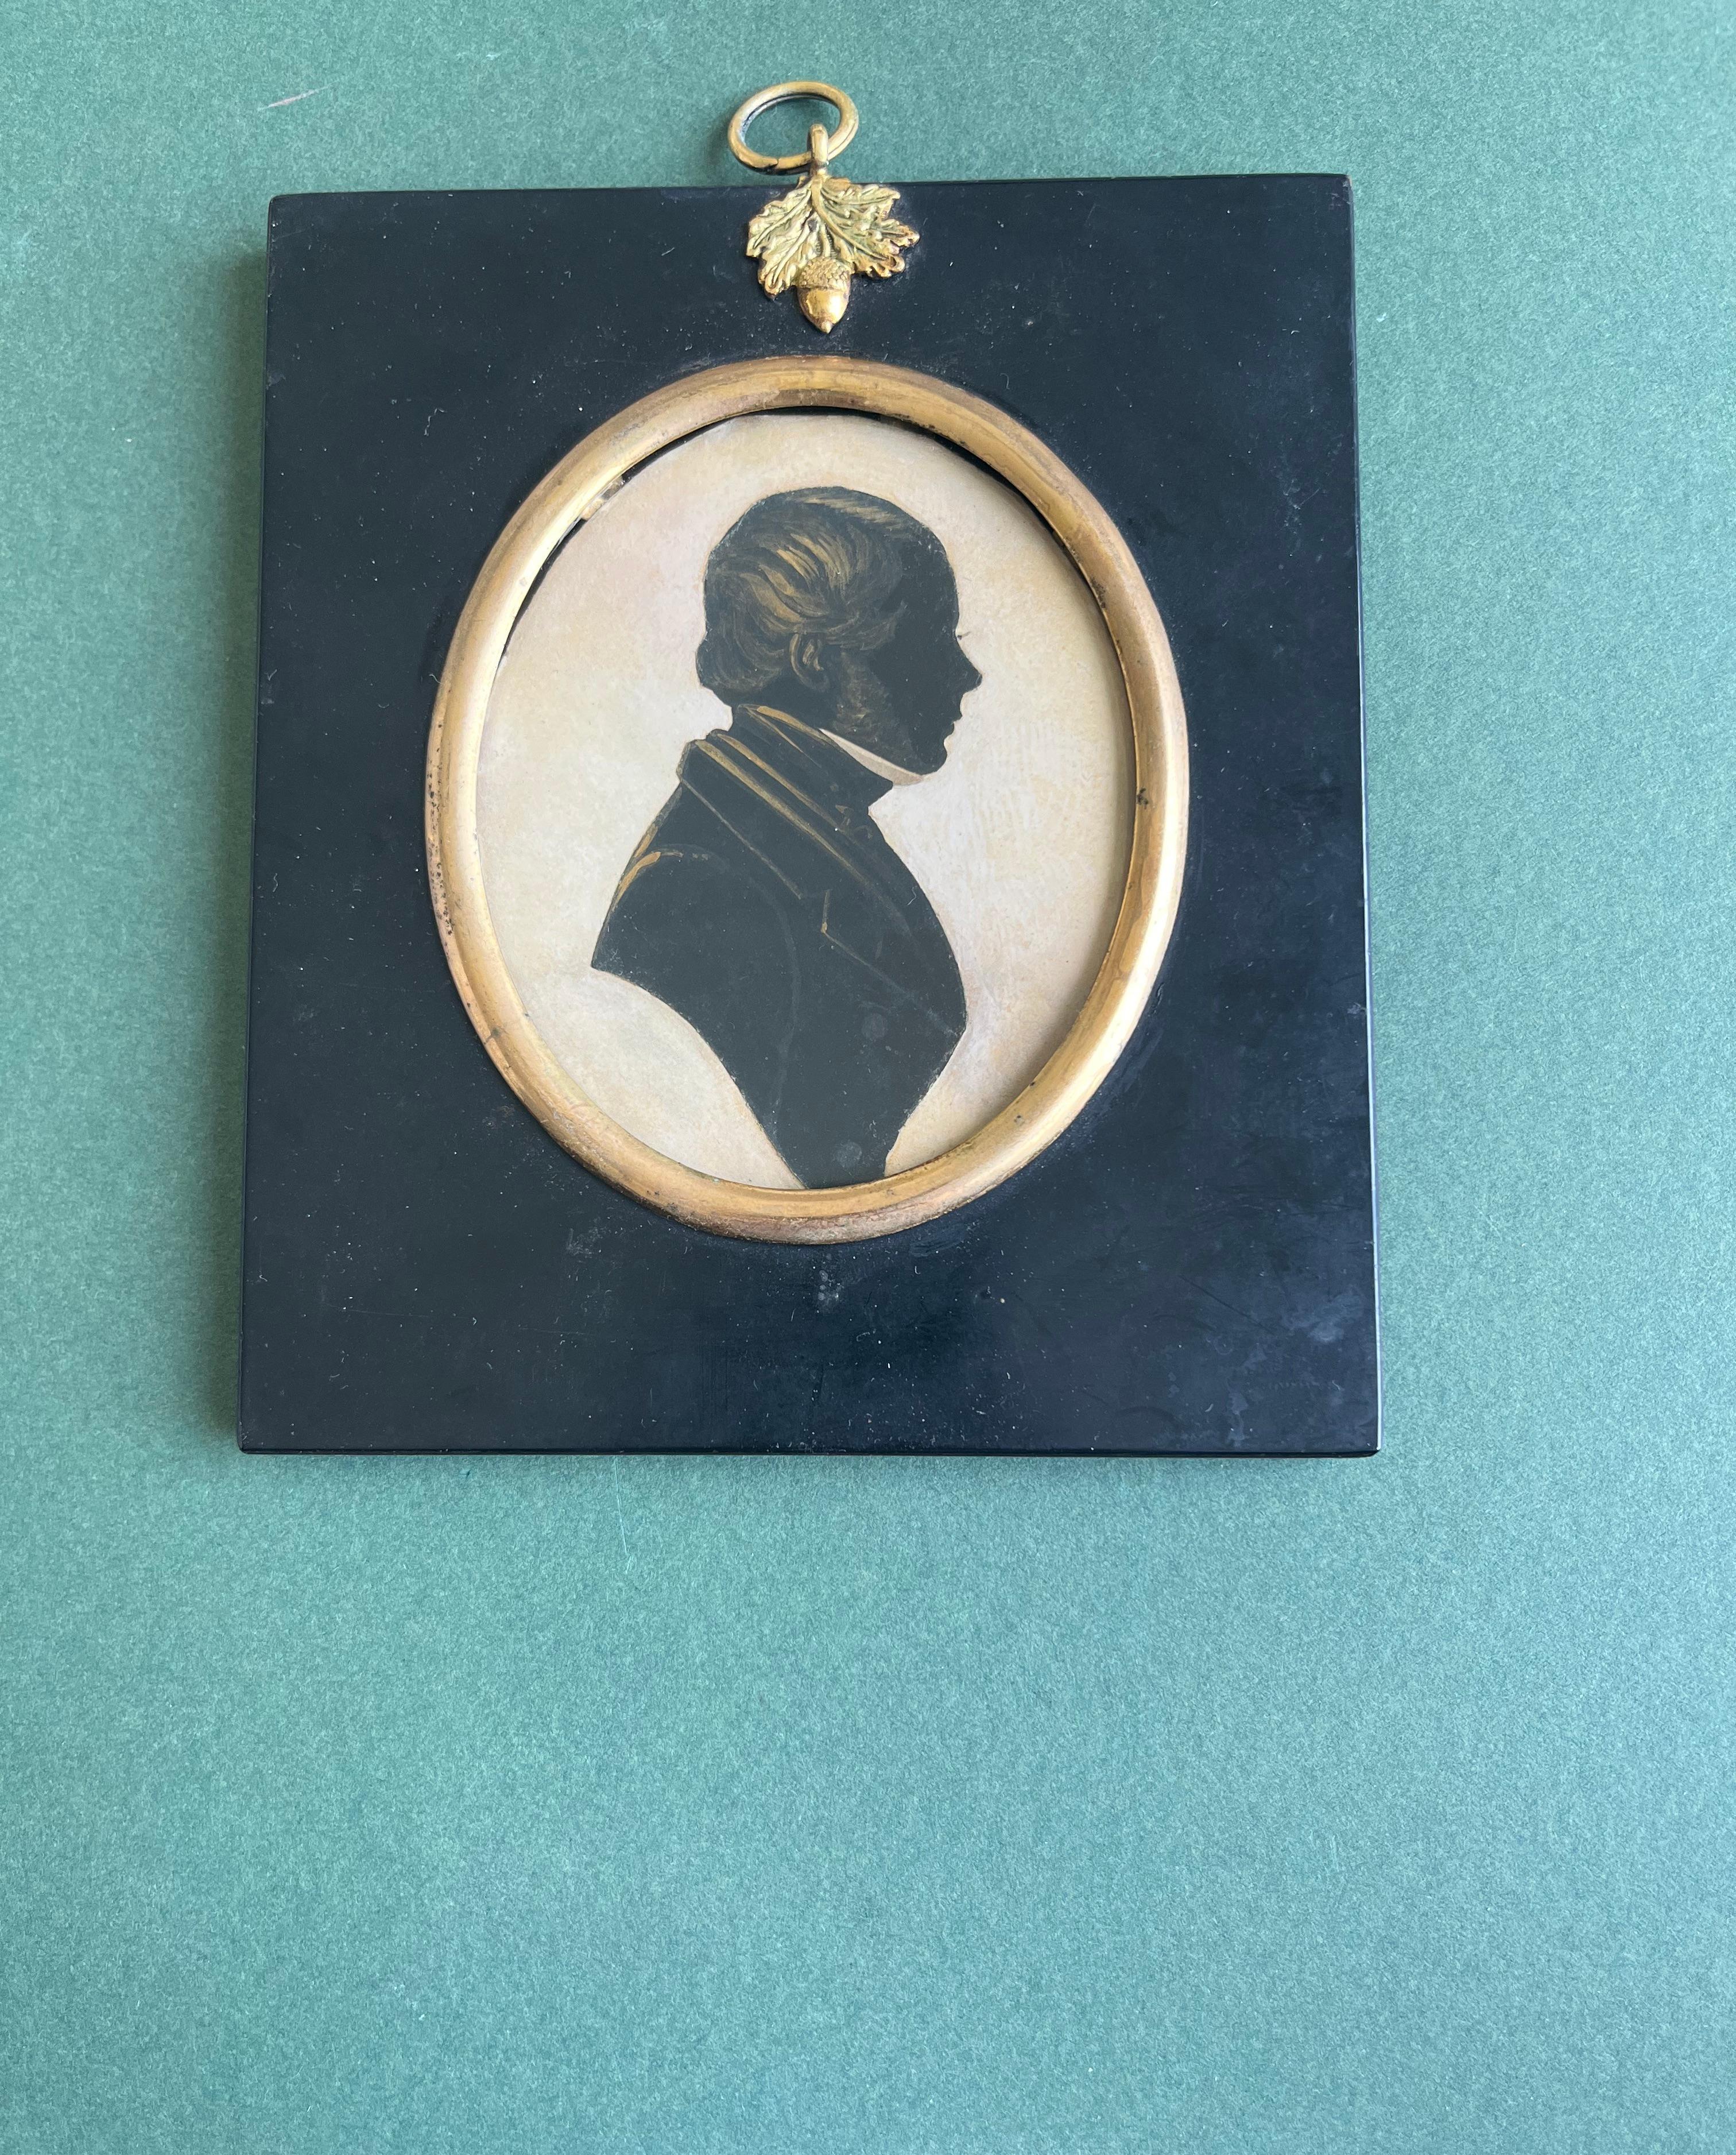 Peter Skeolan mid 19th Century English silhouette portrait For Sale 1